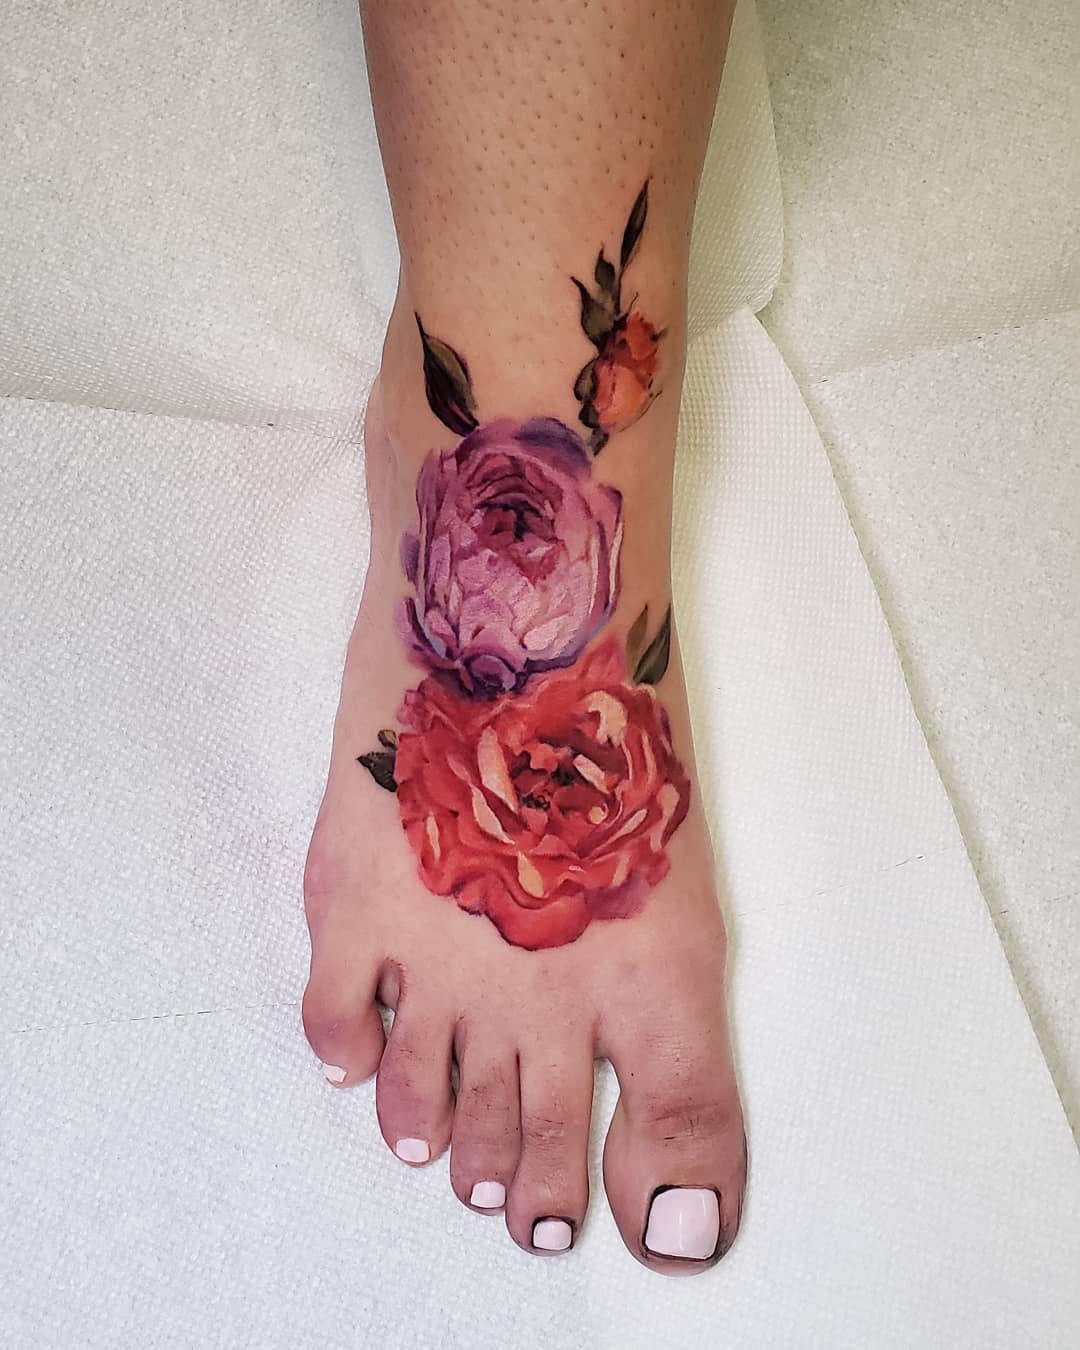 Tattoo artist Pete Zebley, color watercolor flower tattoo for girls | United States